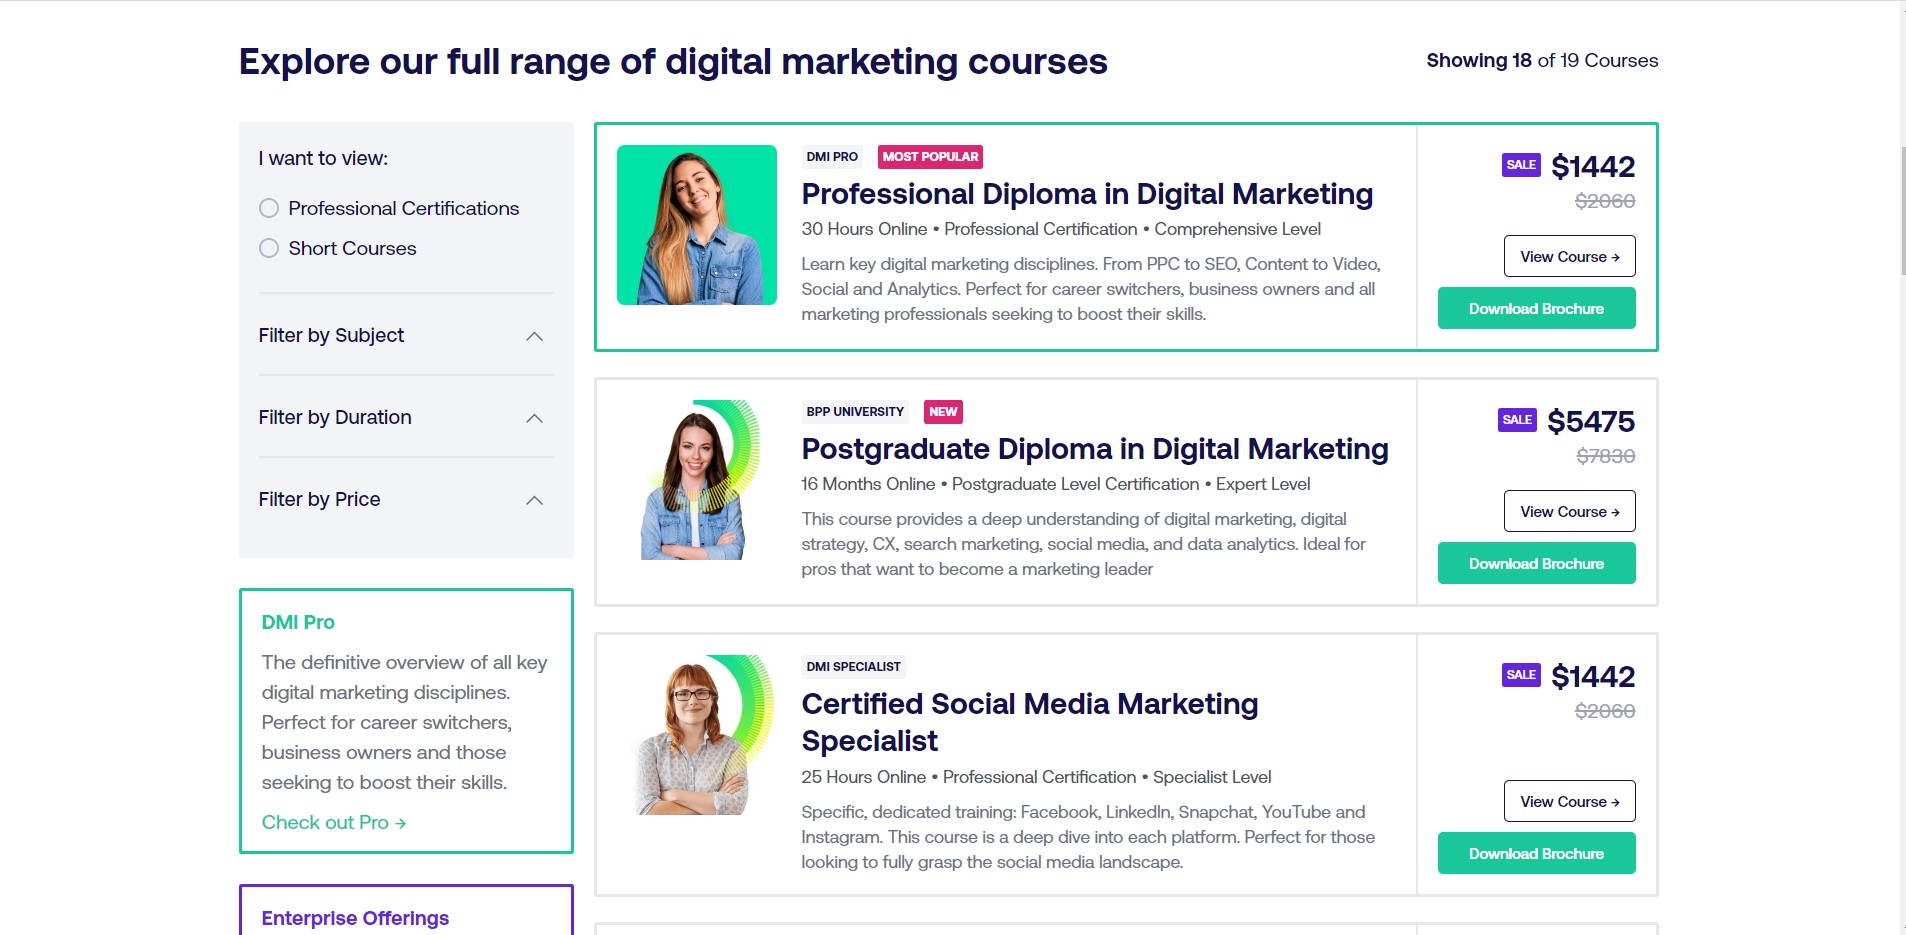 digital marketing courses from digital marketing institute are one of the best